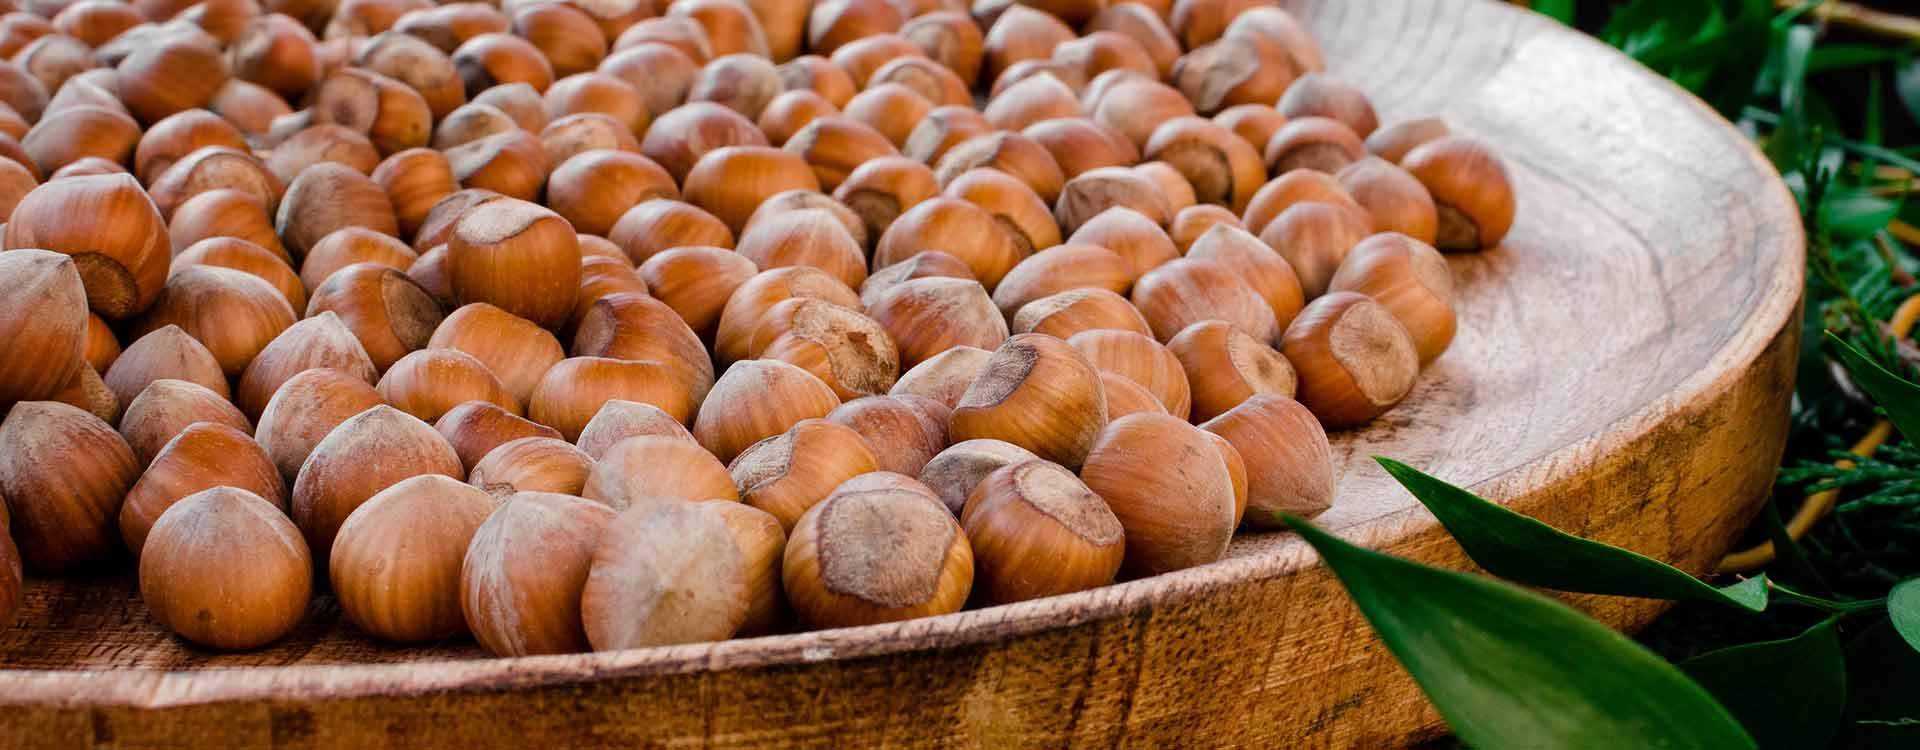 Round, delicate and delicious: PGI Piedmont hazelnut from the Langhe area